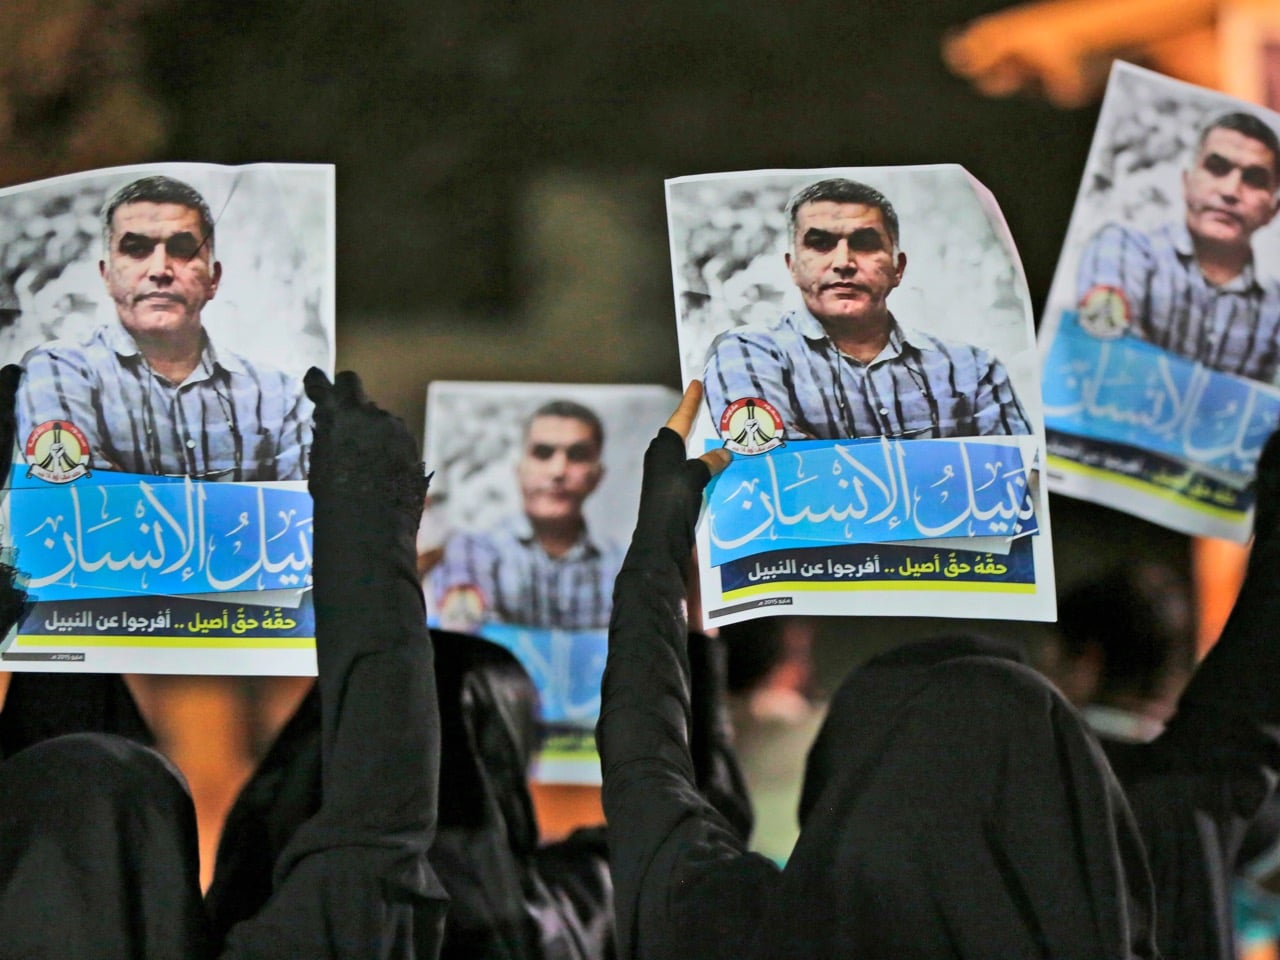 In this 14 May 2015 file photo, Bahraini anti-government protesters hold up images of jailed human rights activist Nabeel Rajab during a solidarity protest outside his home in Bani Jamra, Bahrain, AP Photo/Hasan Jamali, File